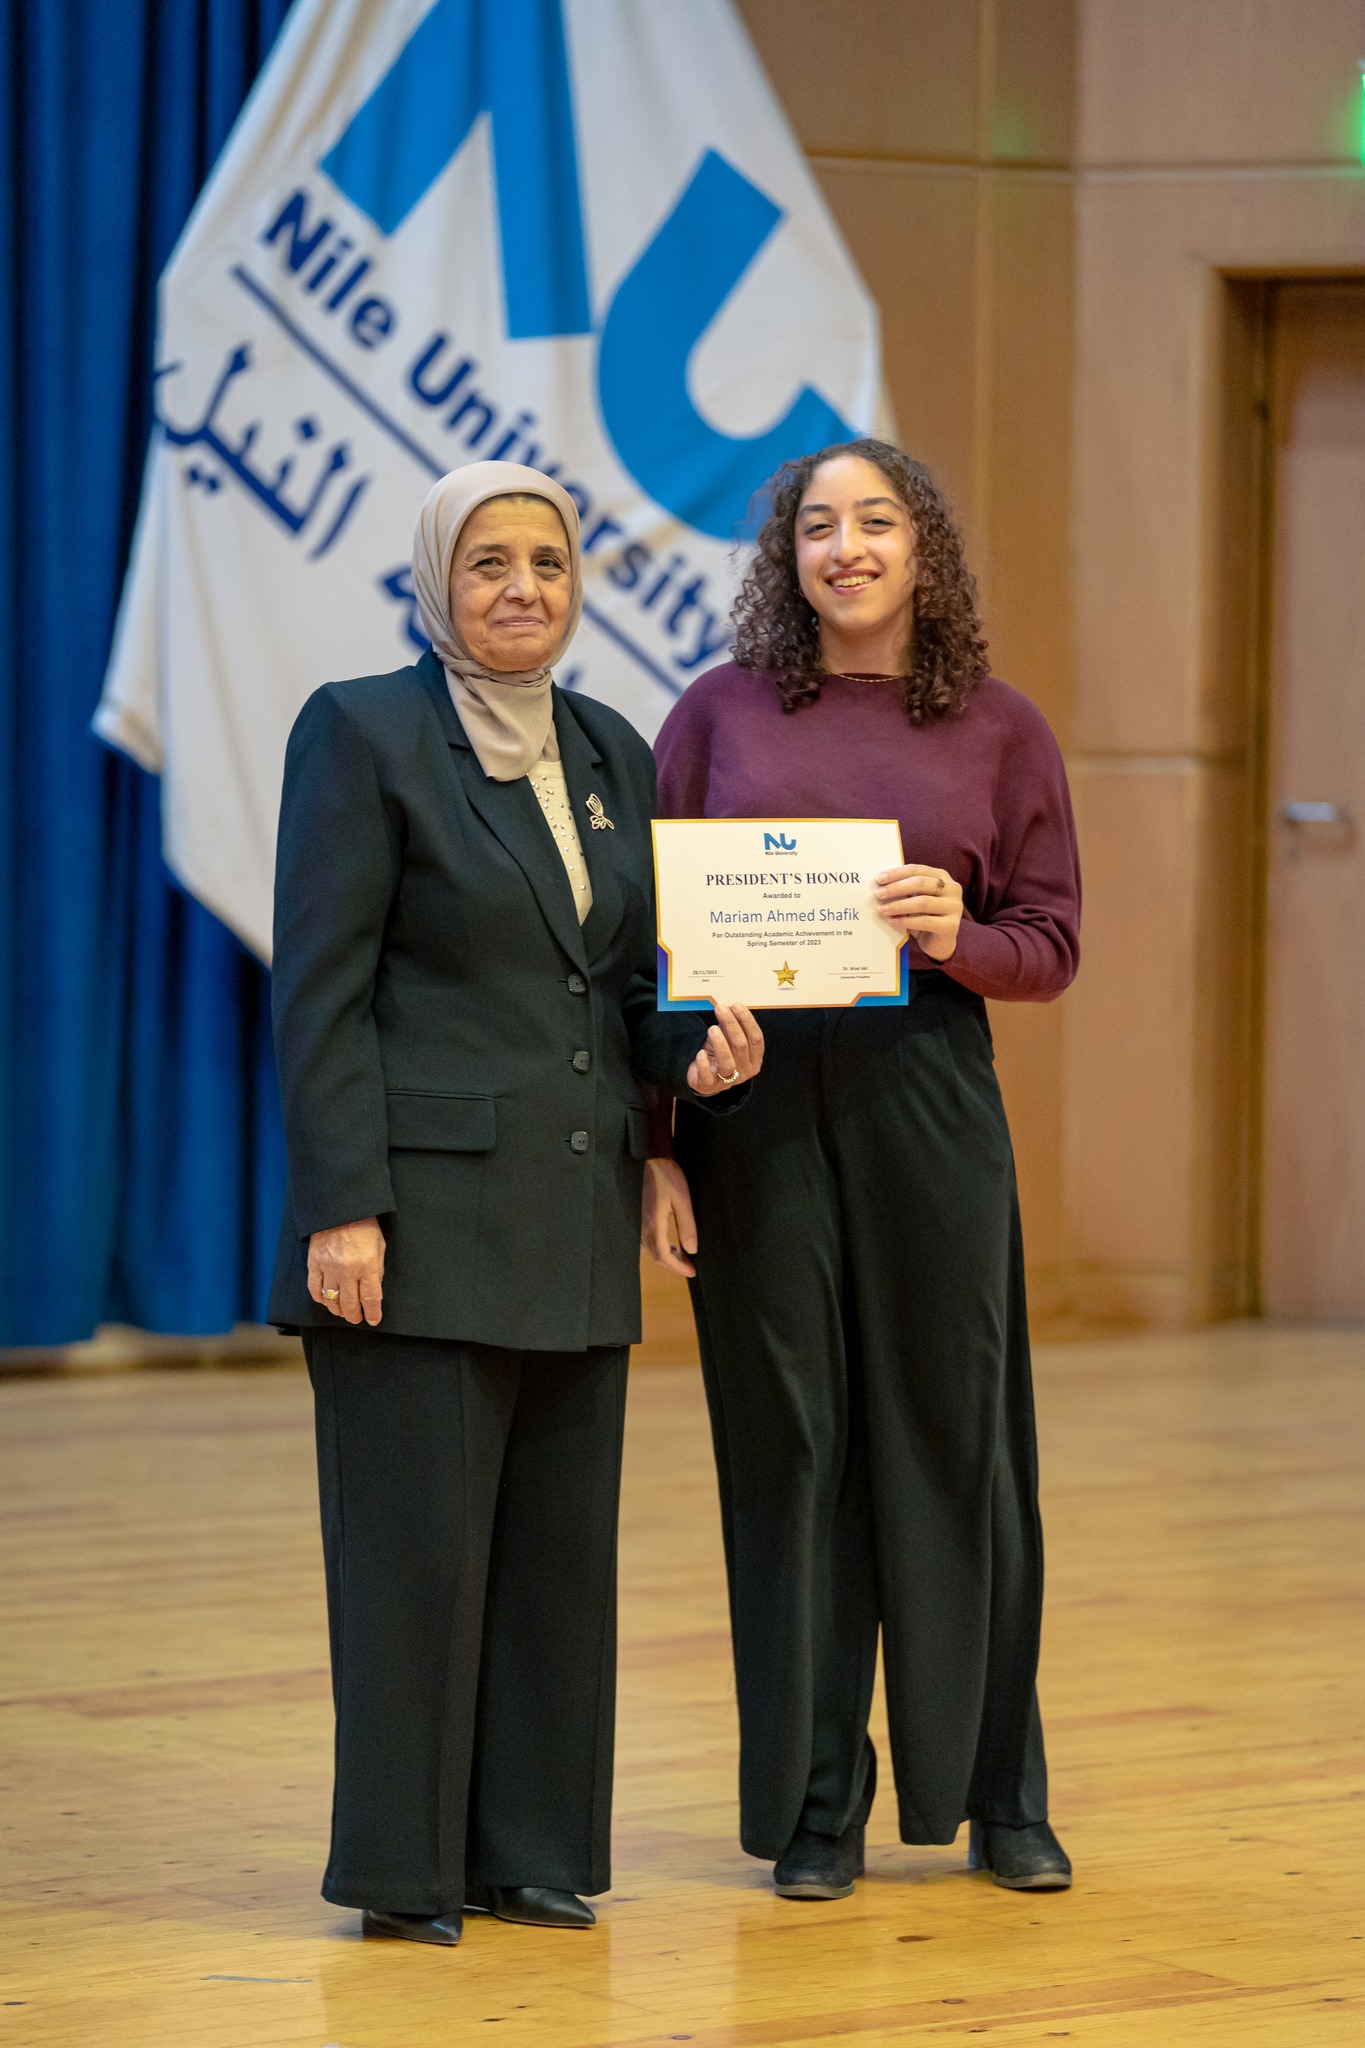 Outstanding President's Honor Students at Nile University